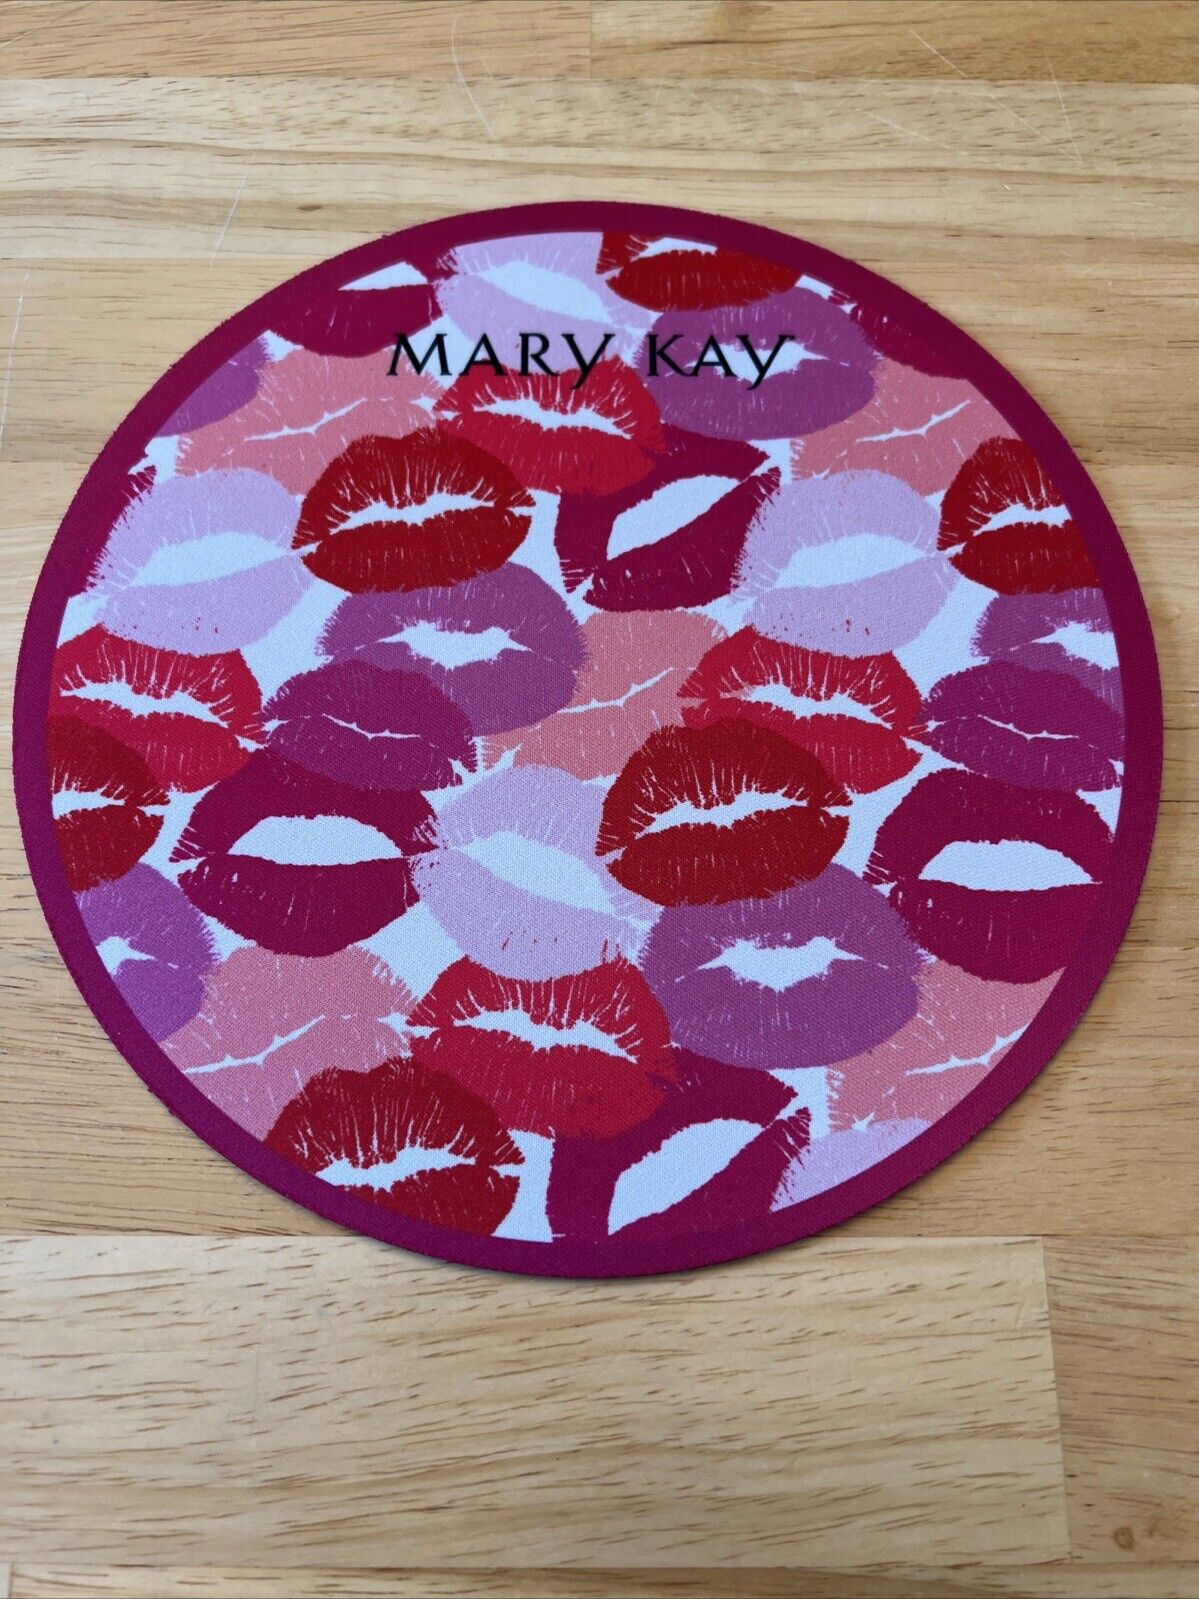 MARY KAY Lips 8” Diameter Mouse Pad NWOT 